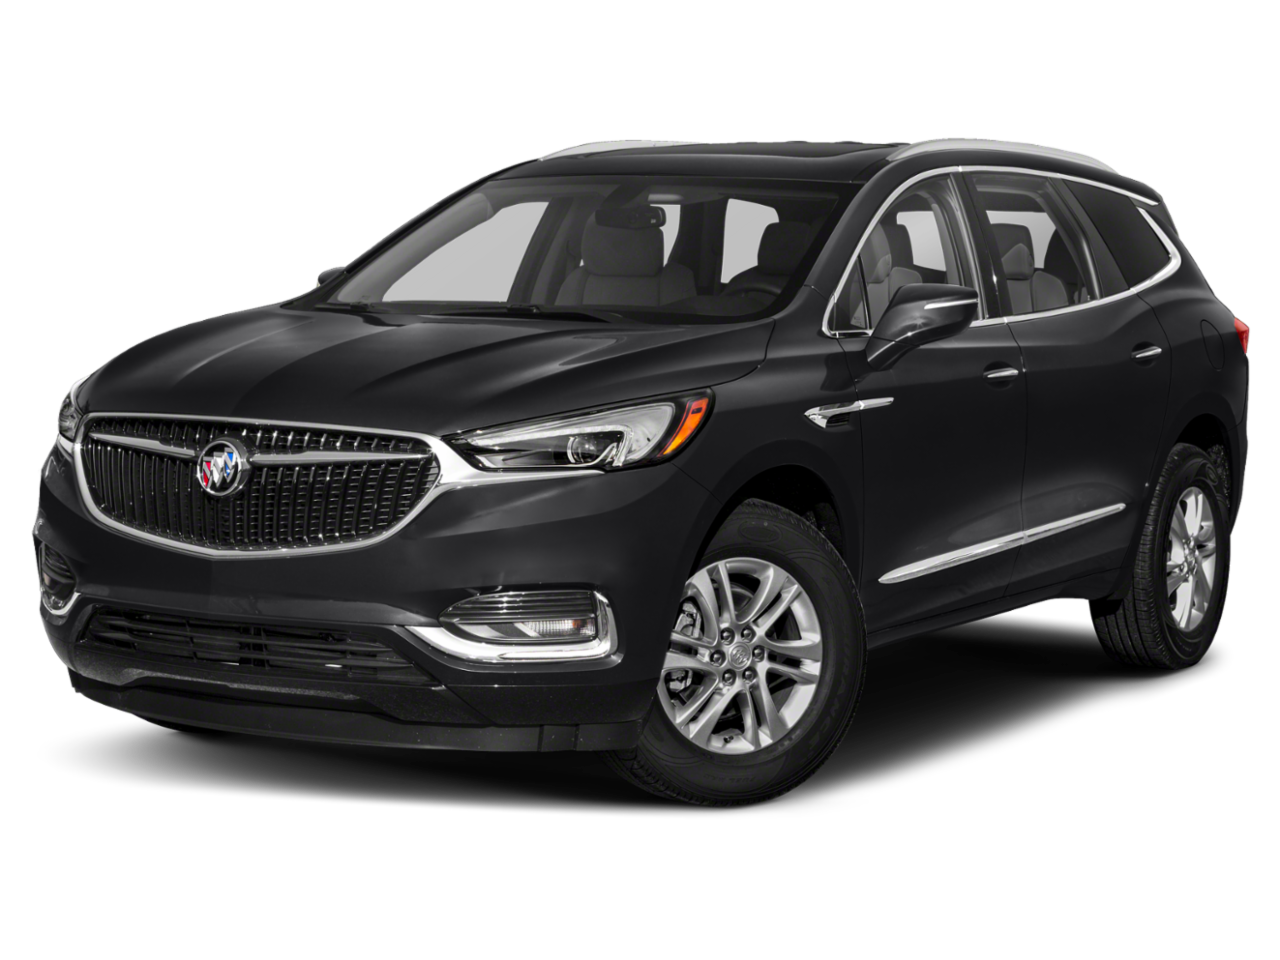 Front Car Buick View HD Image Free PNG Image